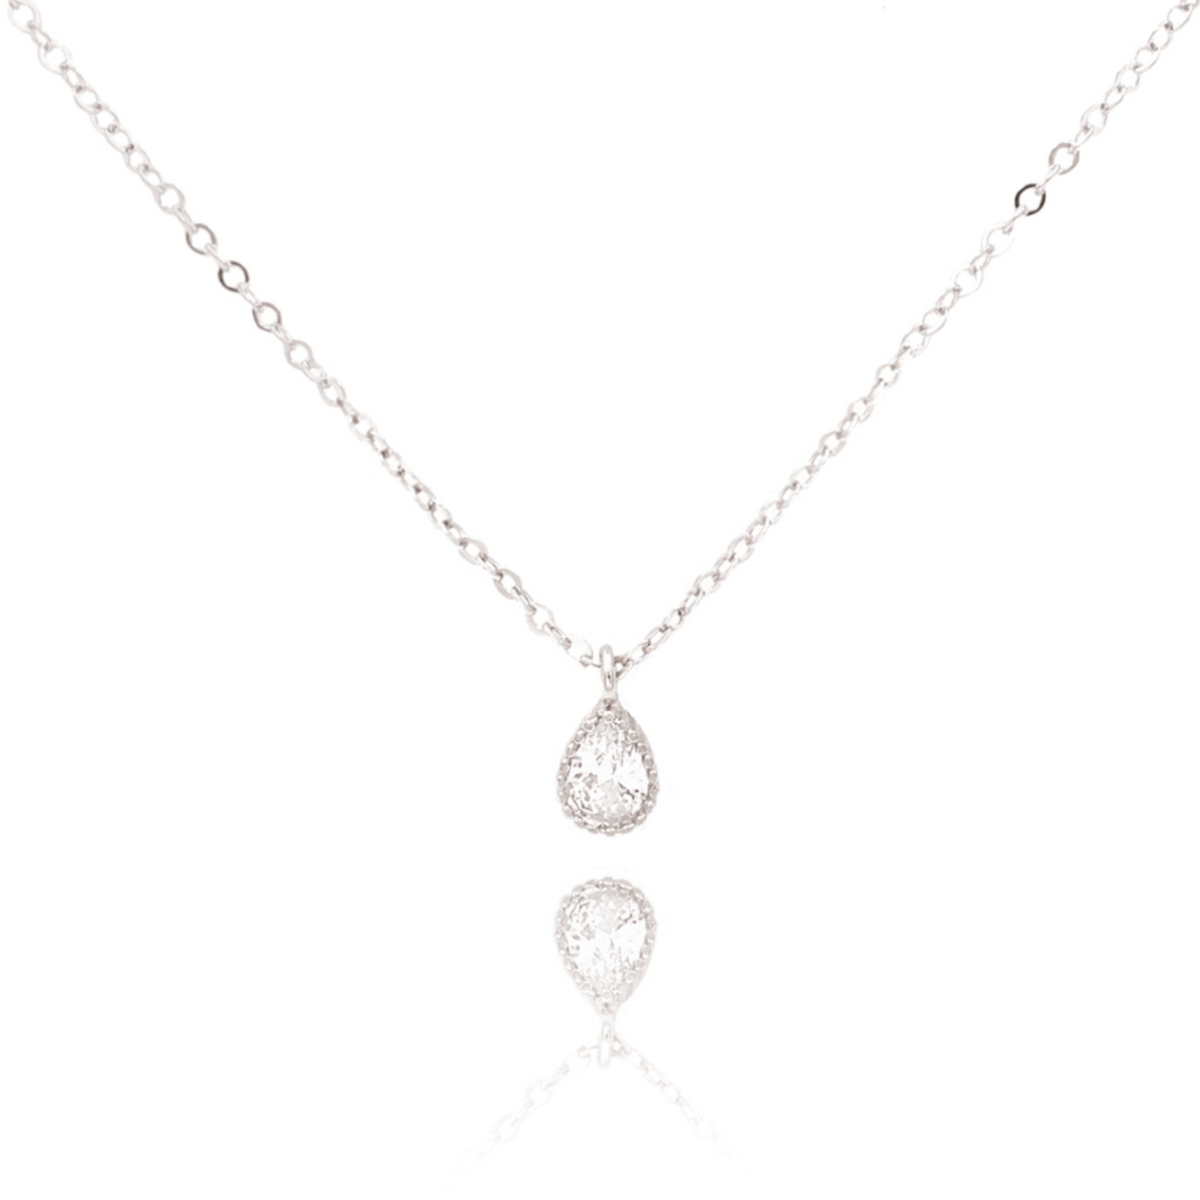 Daughter petal silver chain necklace on white background